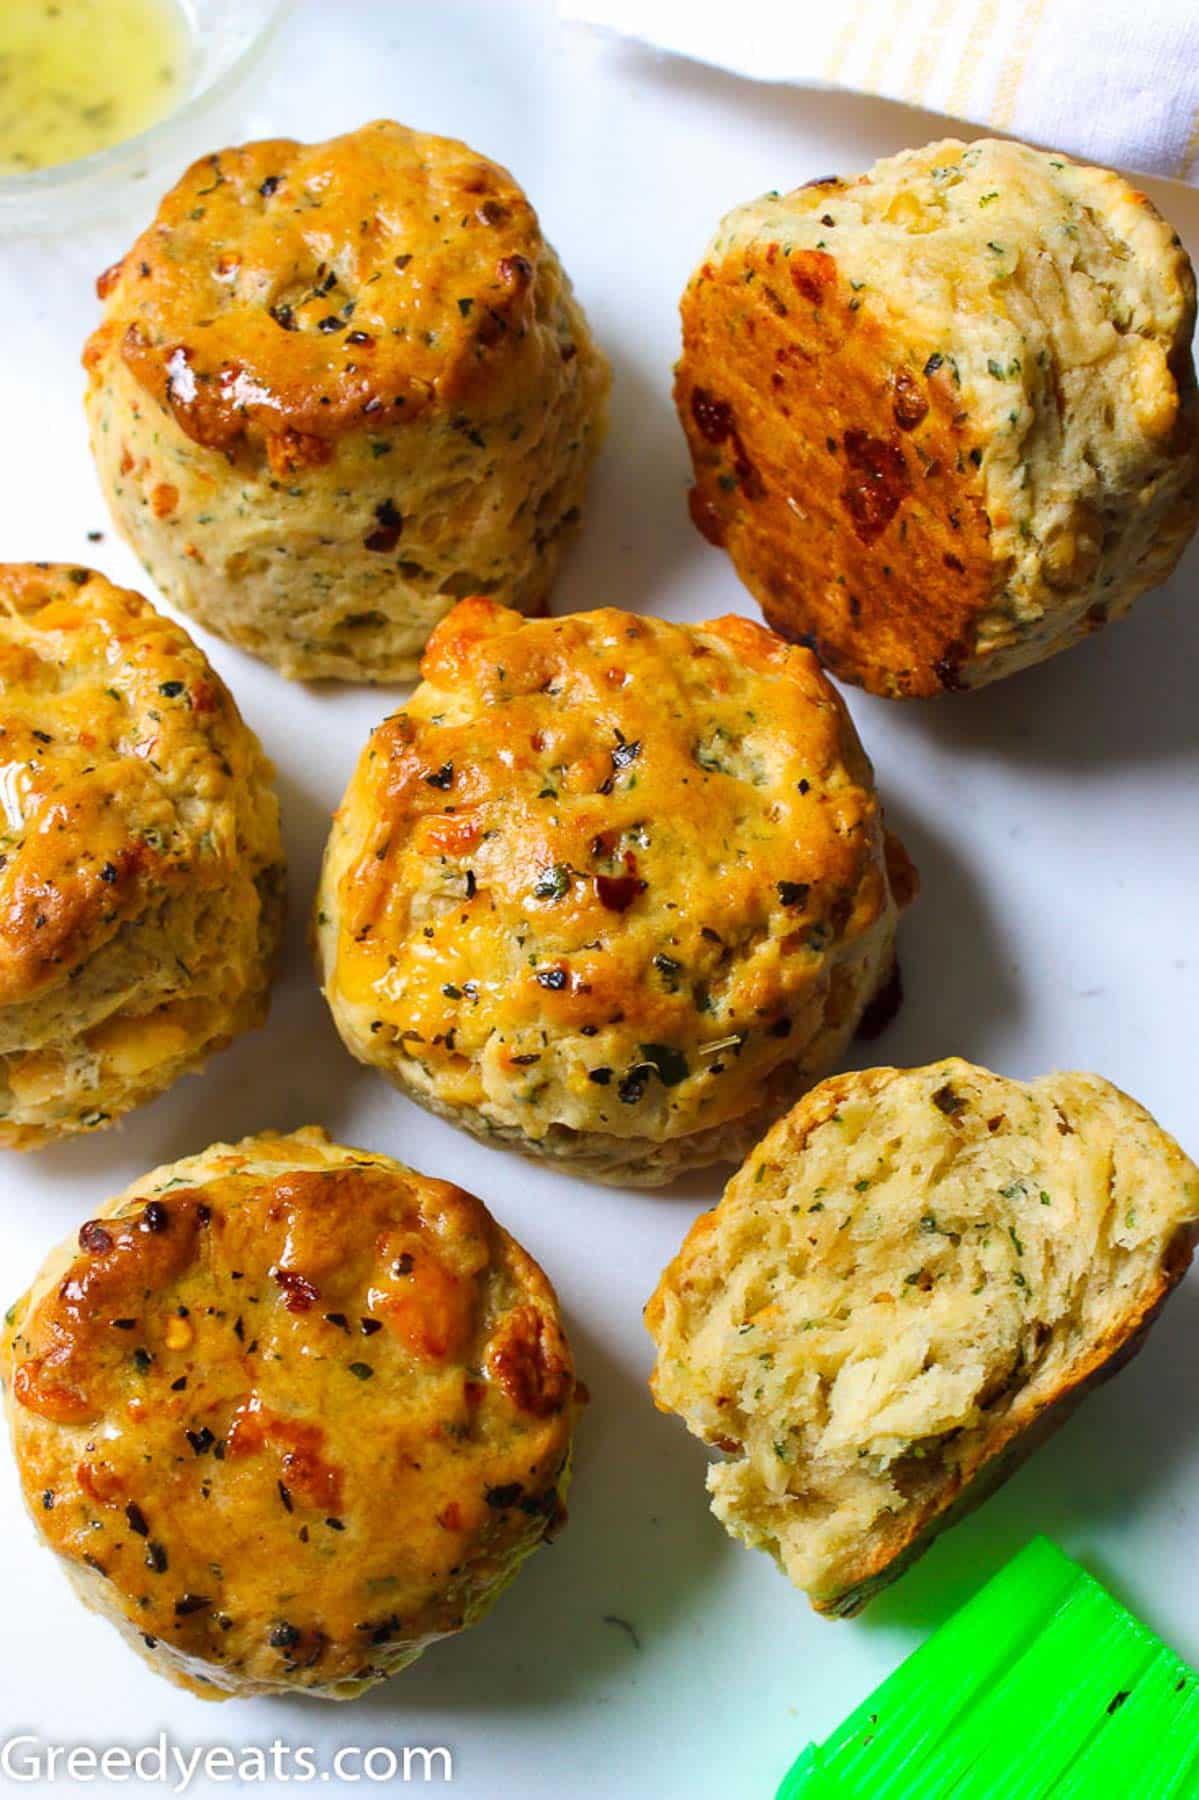 These homemade Cheese biscuits use simple pantry ingredients, infused with fresh garlic and is so cheesy.